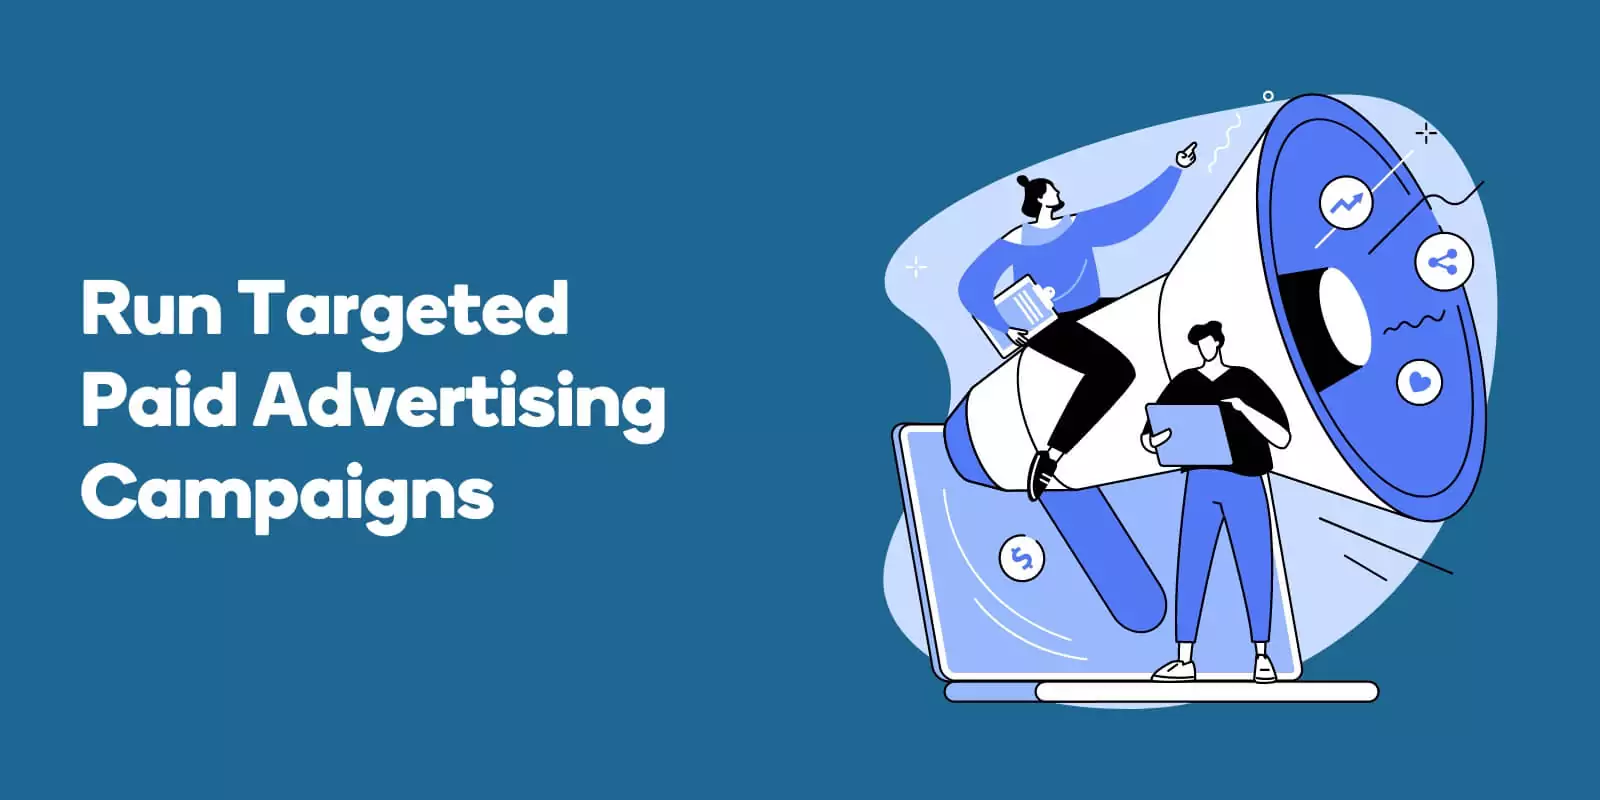 Run Targeted Paid Advertising Campaigns